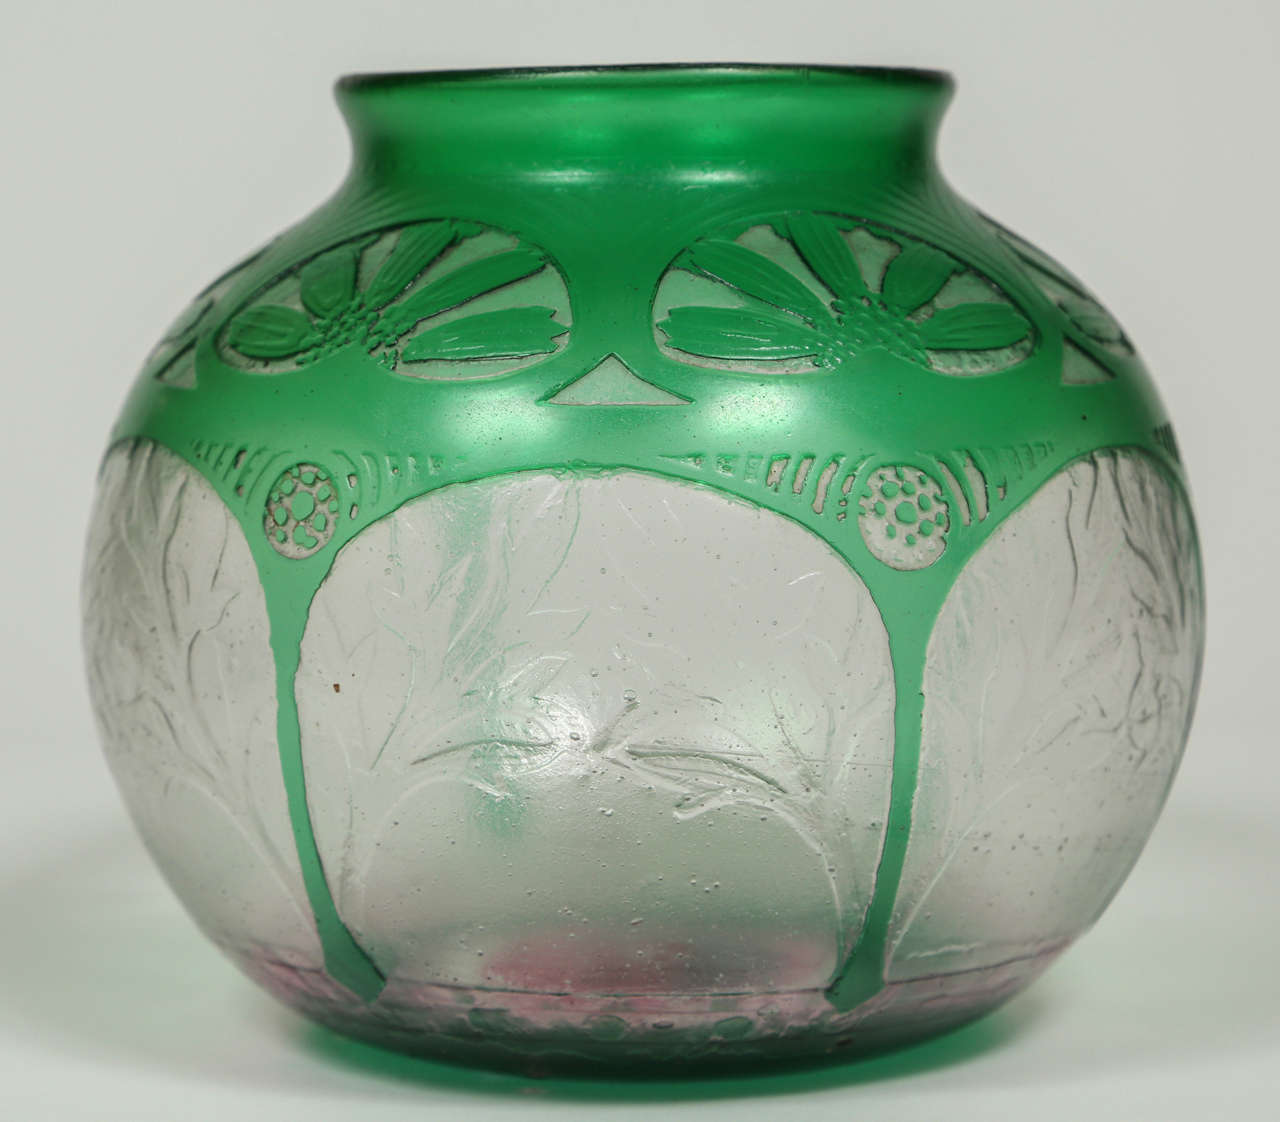 A lovely Art Deco acid etched Daum glass vase with a beautiful green etched through to the clear below with a fabulous design of stylized leaves and flowers. The bottom of the vase also has a faint layer of pink glass over the clear glass. The 